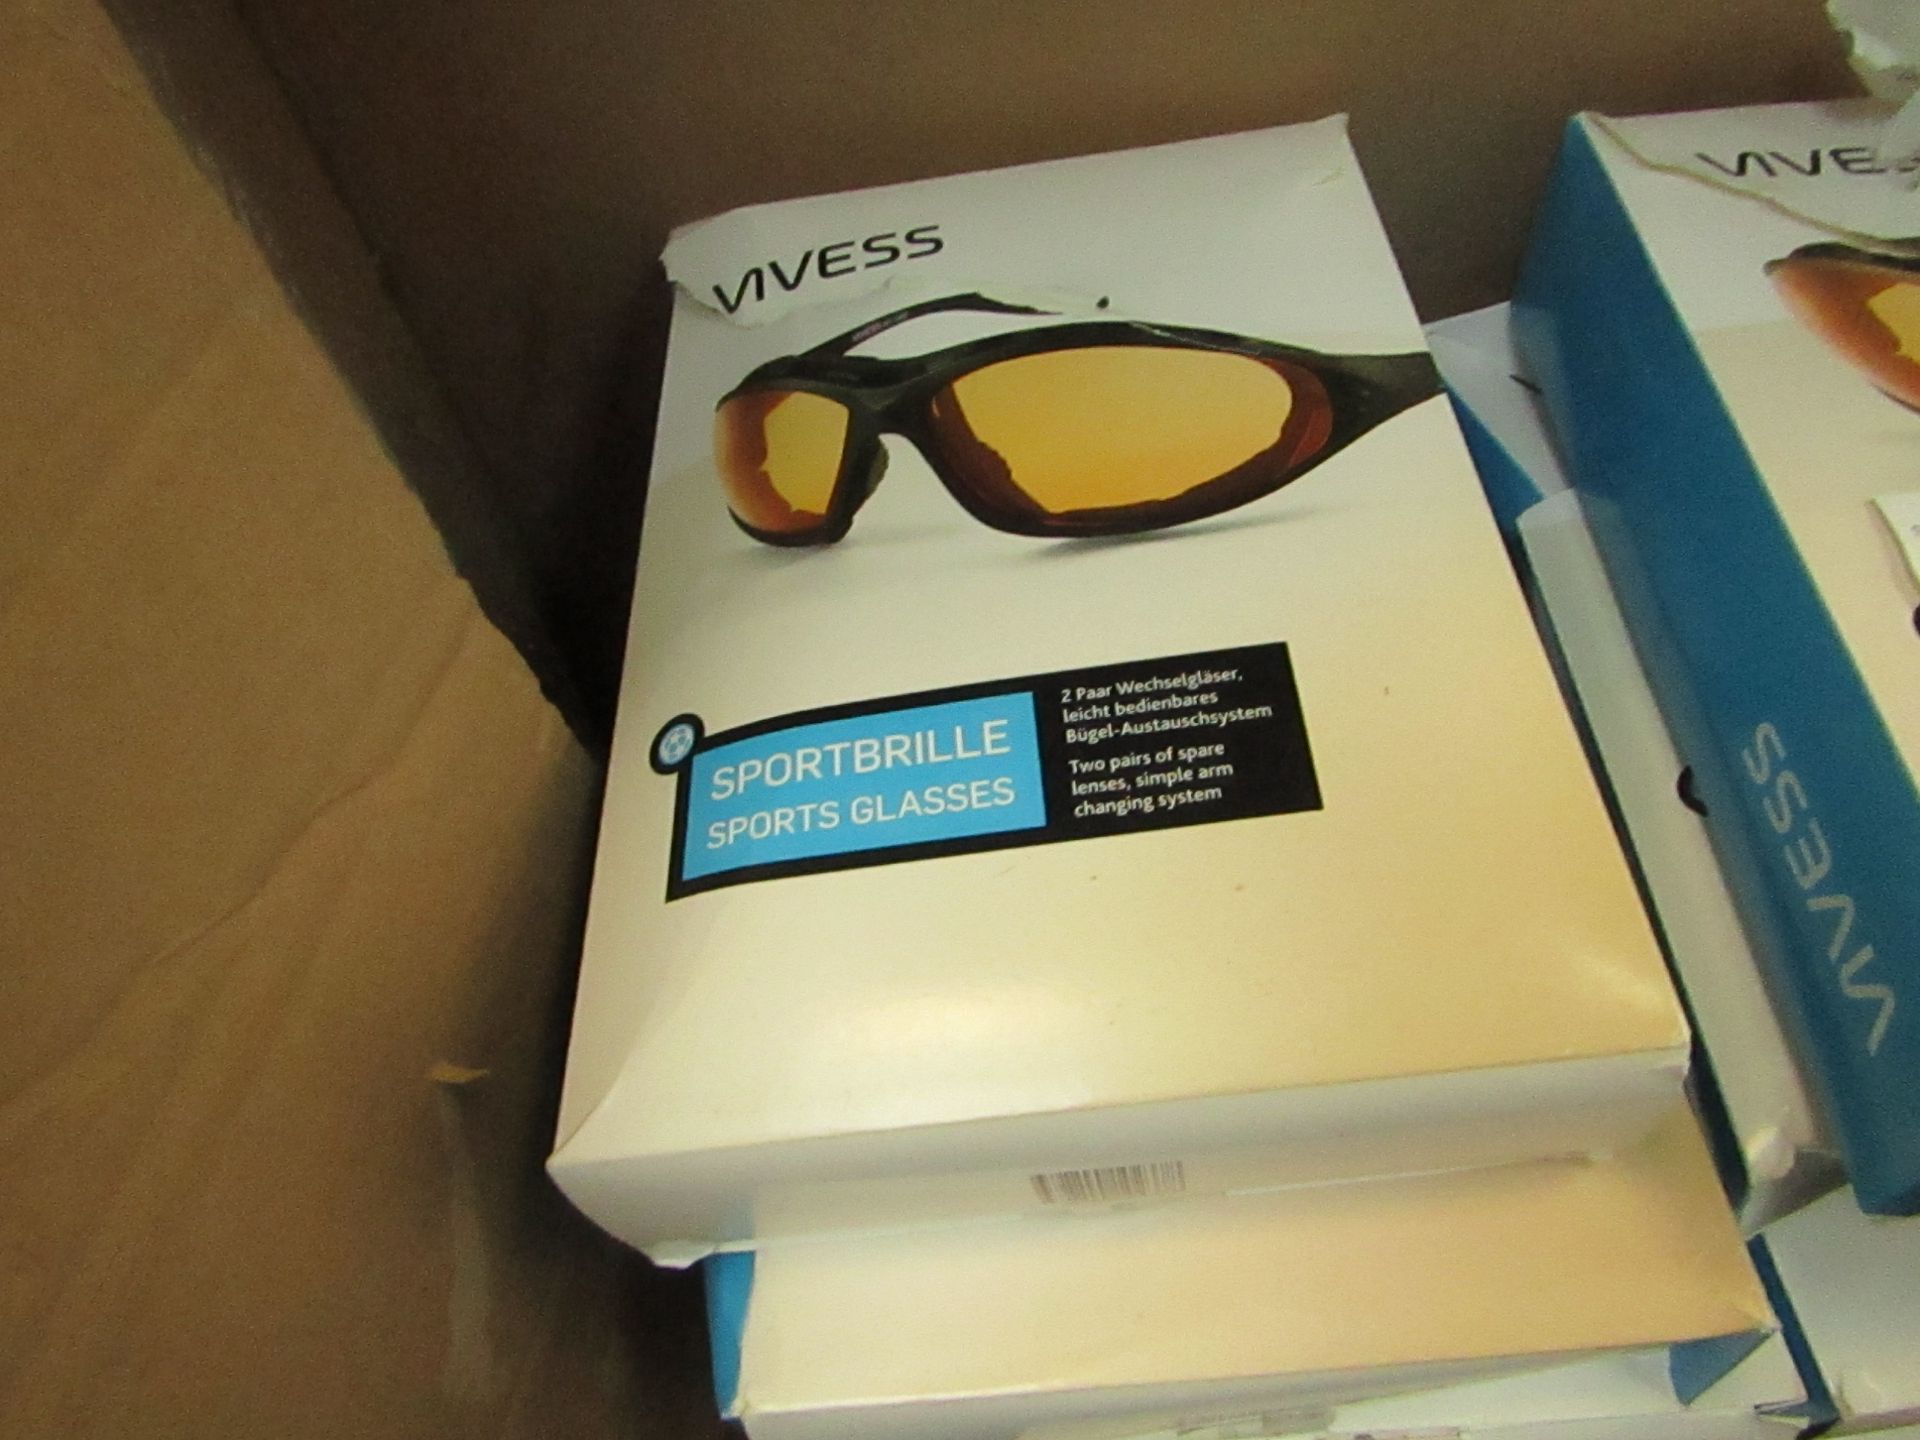 Vivess SportBrille Sports Glasses - New & Boxed (but may have damaged packaging)